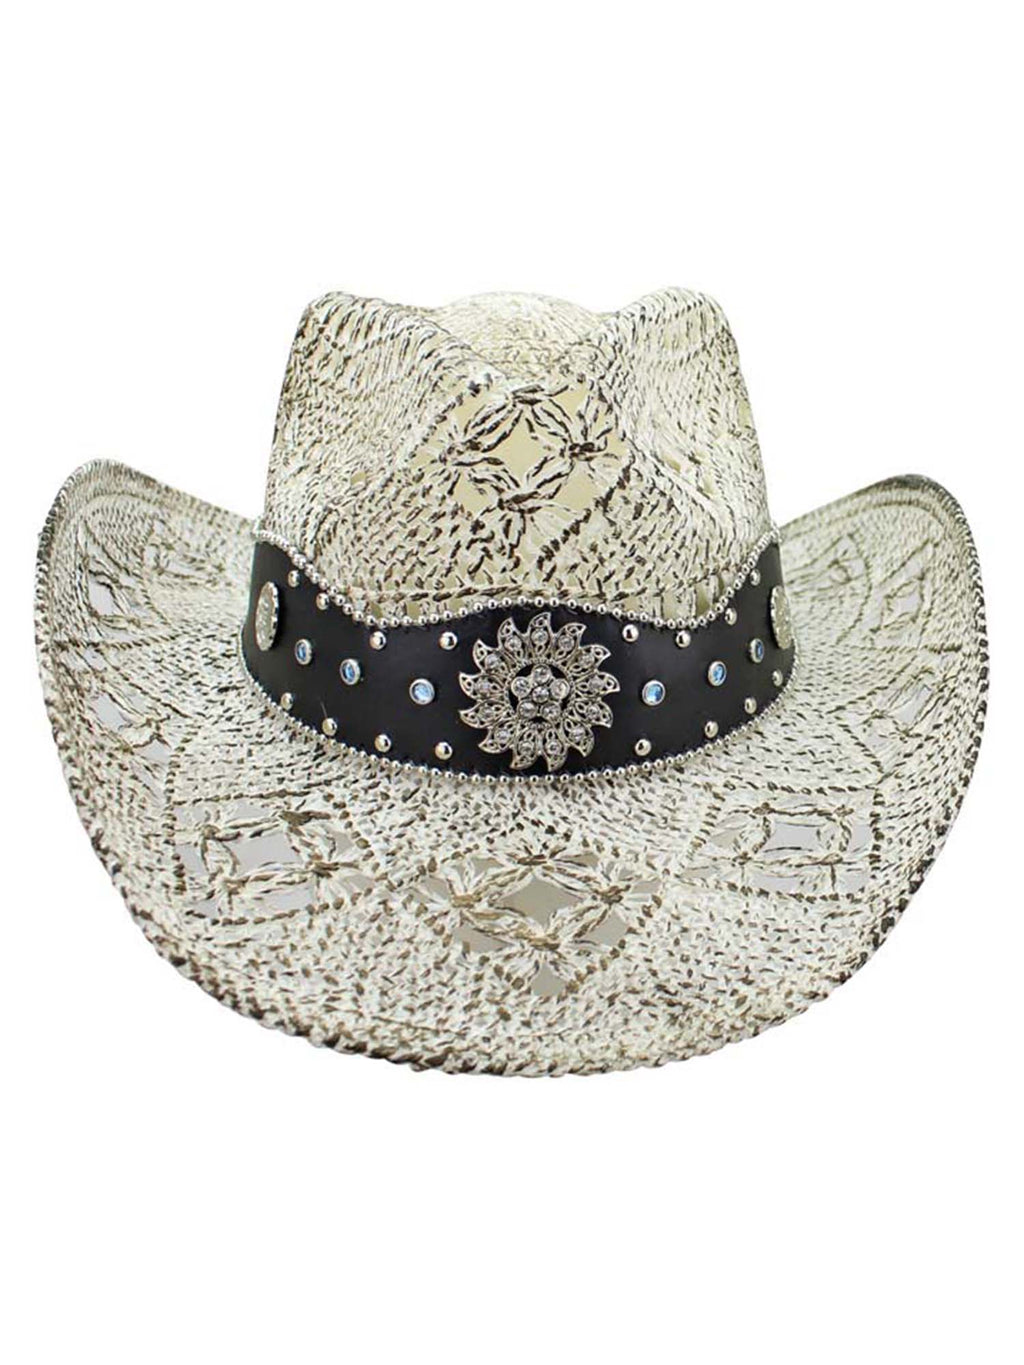 White Antiqued Straw Cowboy Hat With Jeweled Band